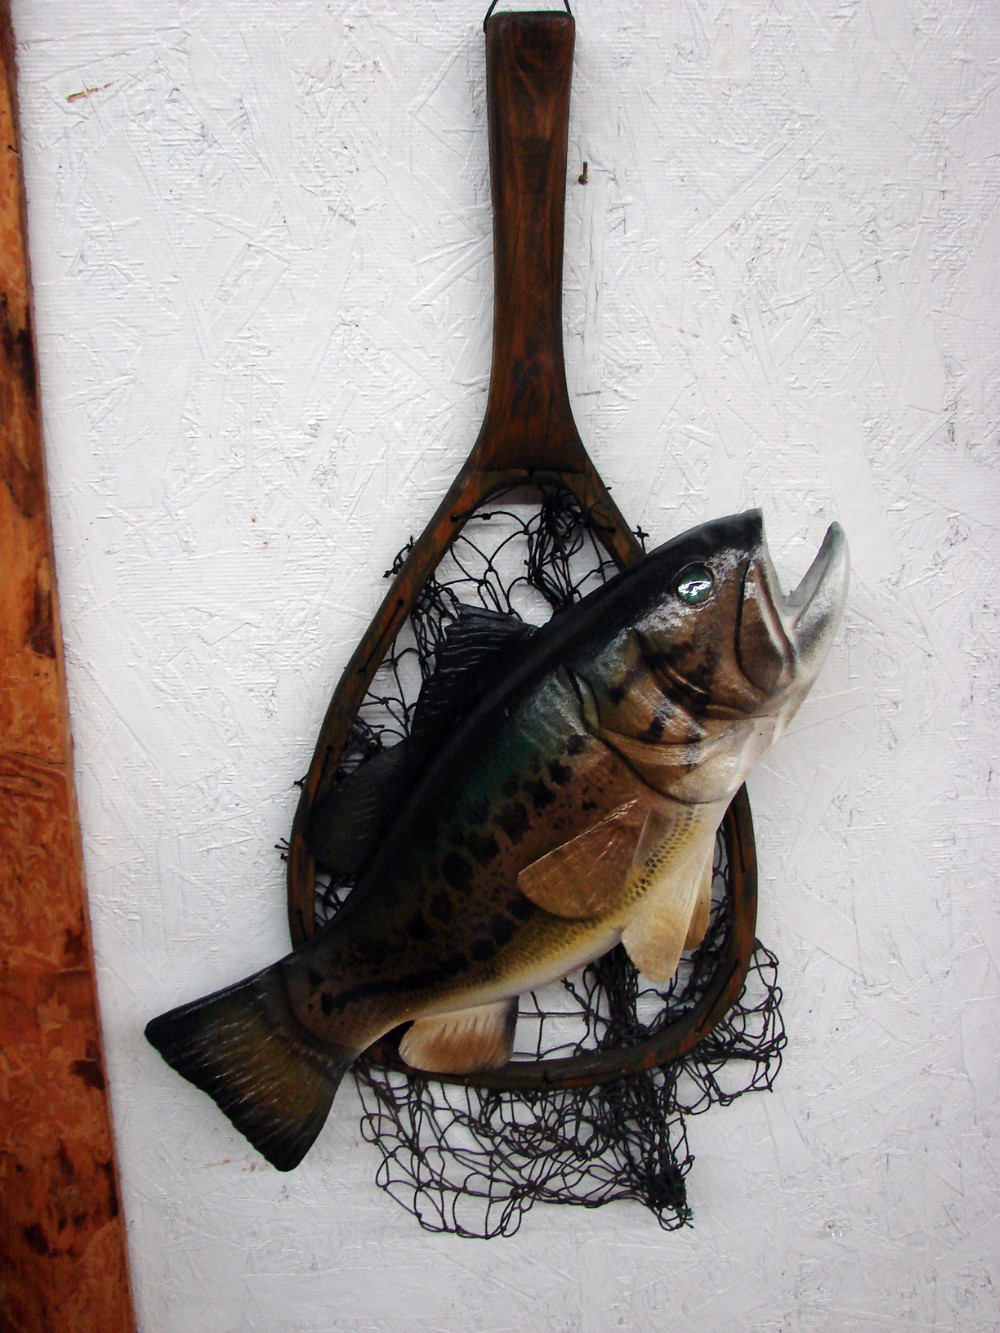 Casey Edwards Hand Carved Wood Bass in Fishing Net Fish Cabin